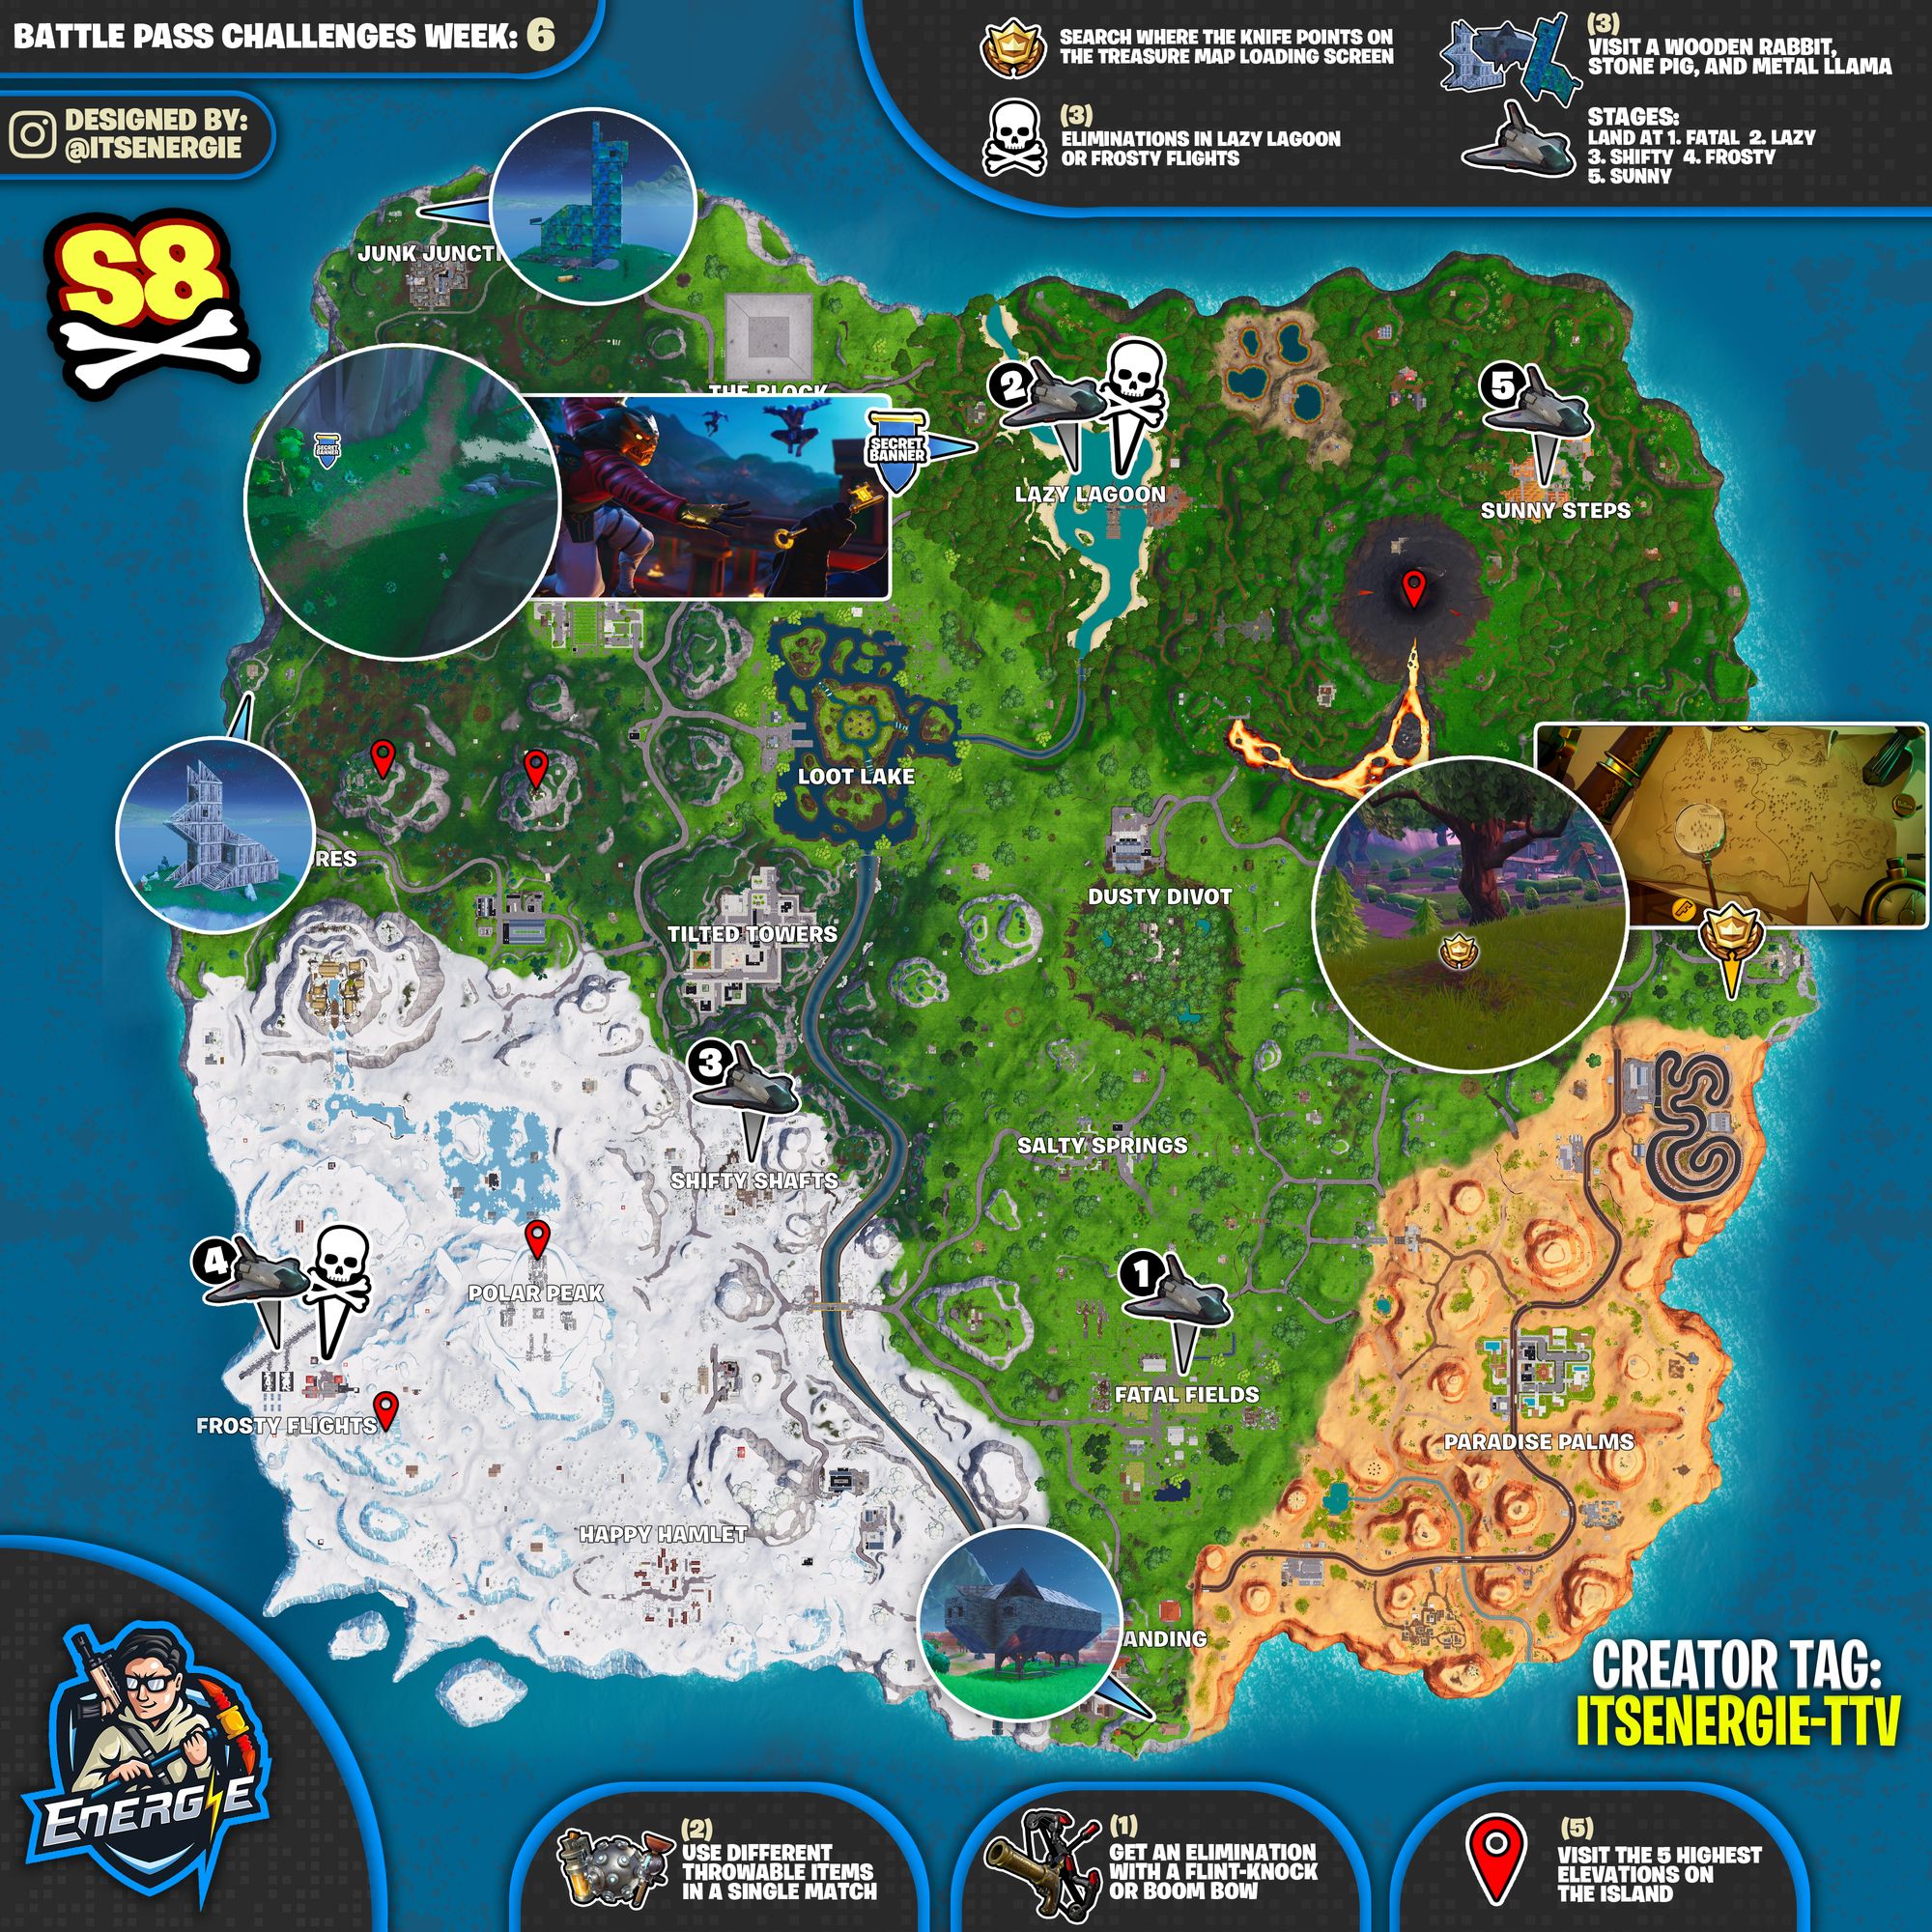 struggling with this week s challenges the cheat sheet mastermind itsenergie has put together another cheat sheet to make our lives a little bit easier - fortnite week 8 cheat sheet season 6